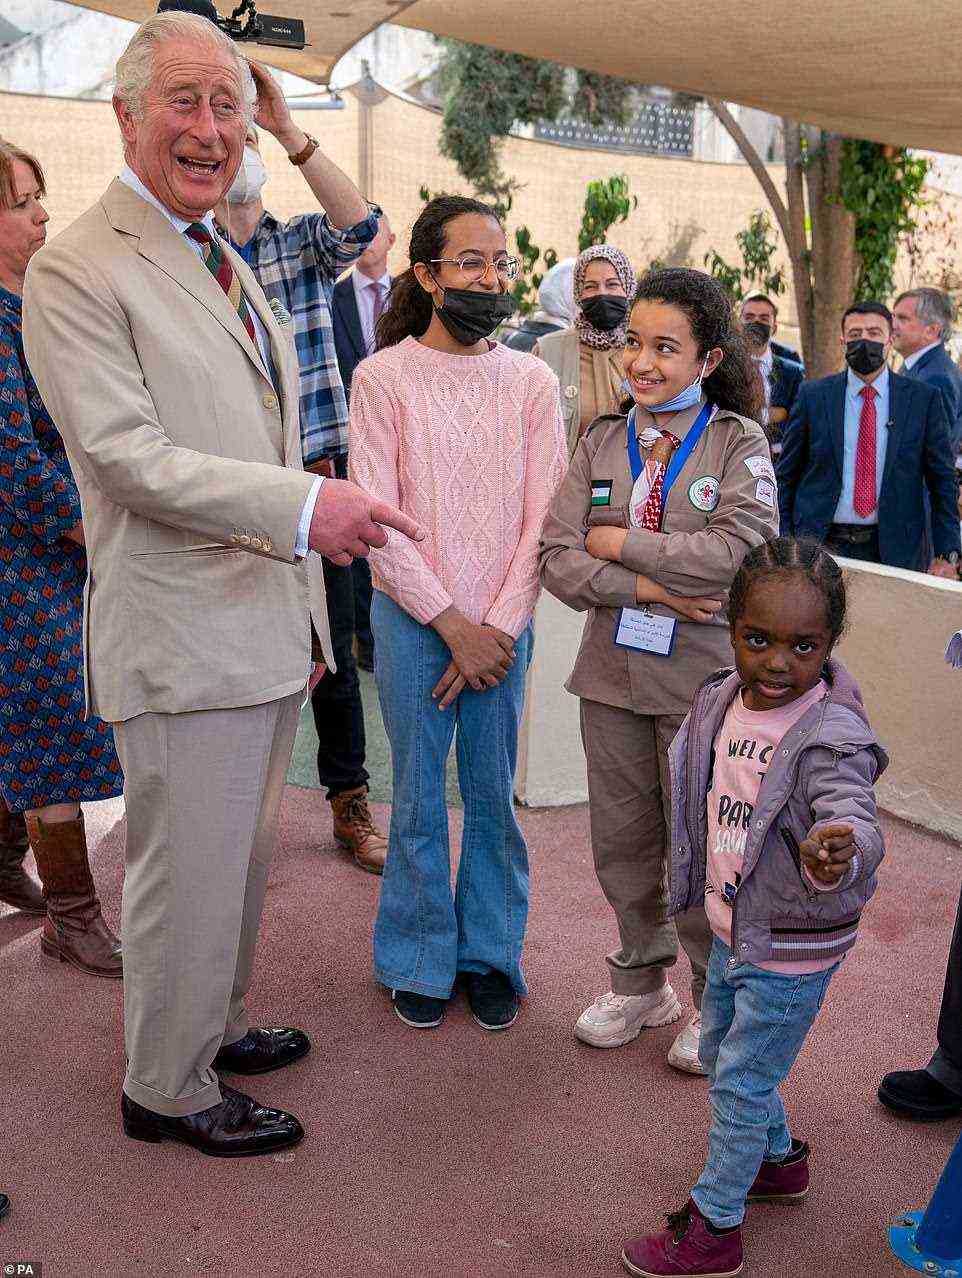 The royal was on jovial form this afternoon in Jordan as he met four-year-old Salapelo while visiting the community centre